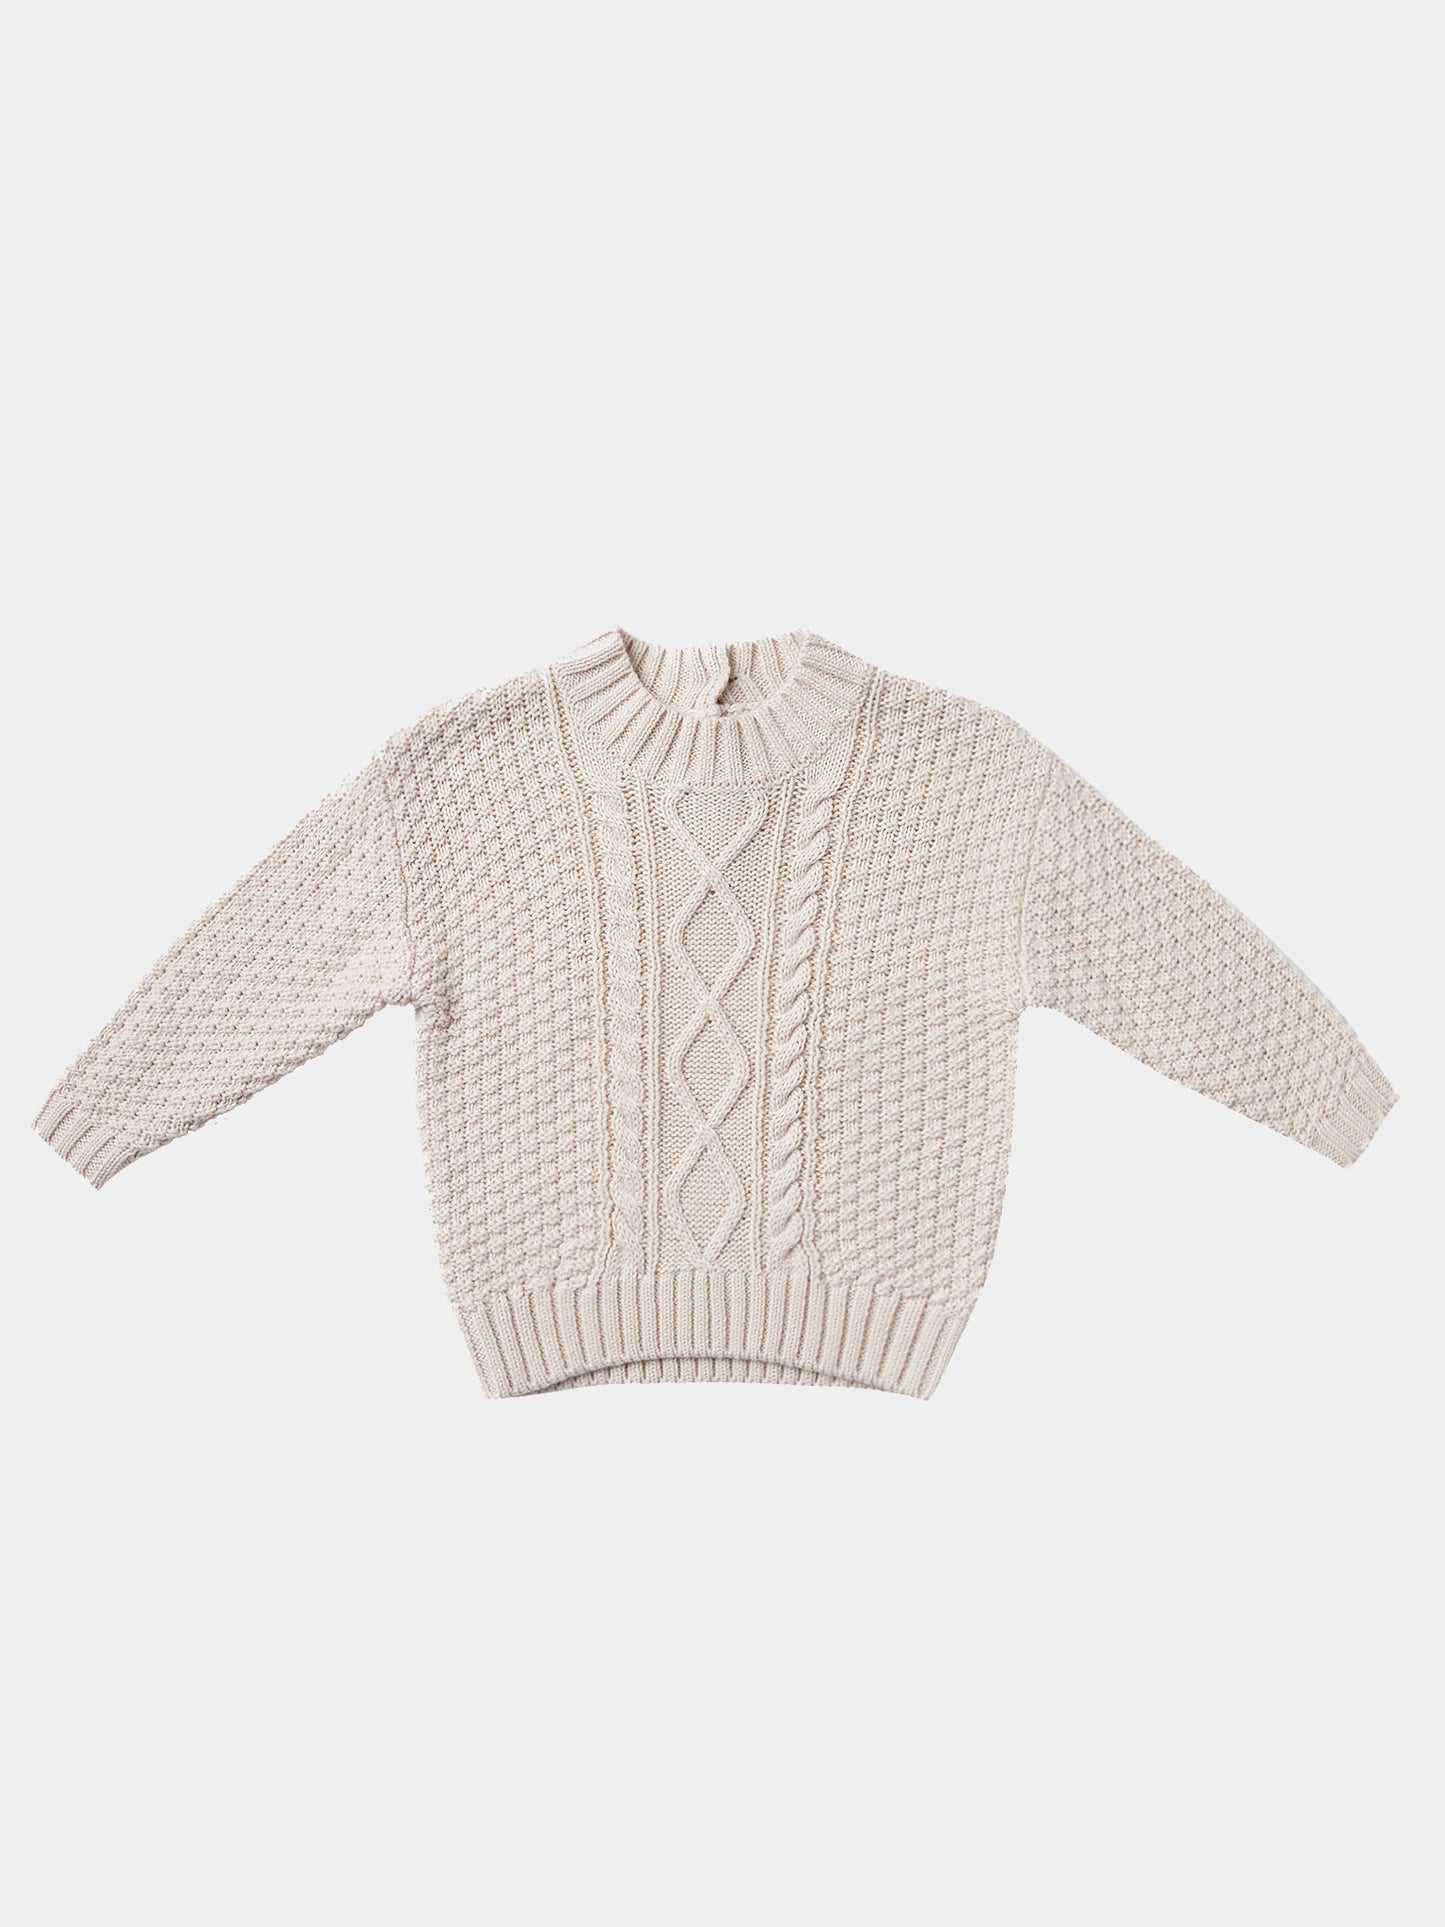 Quincy Mae Baby Cable Knit Sweater